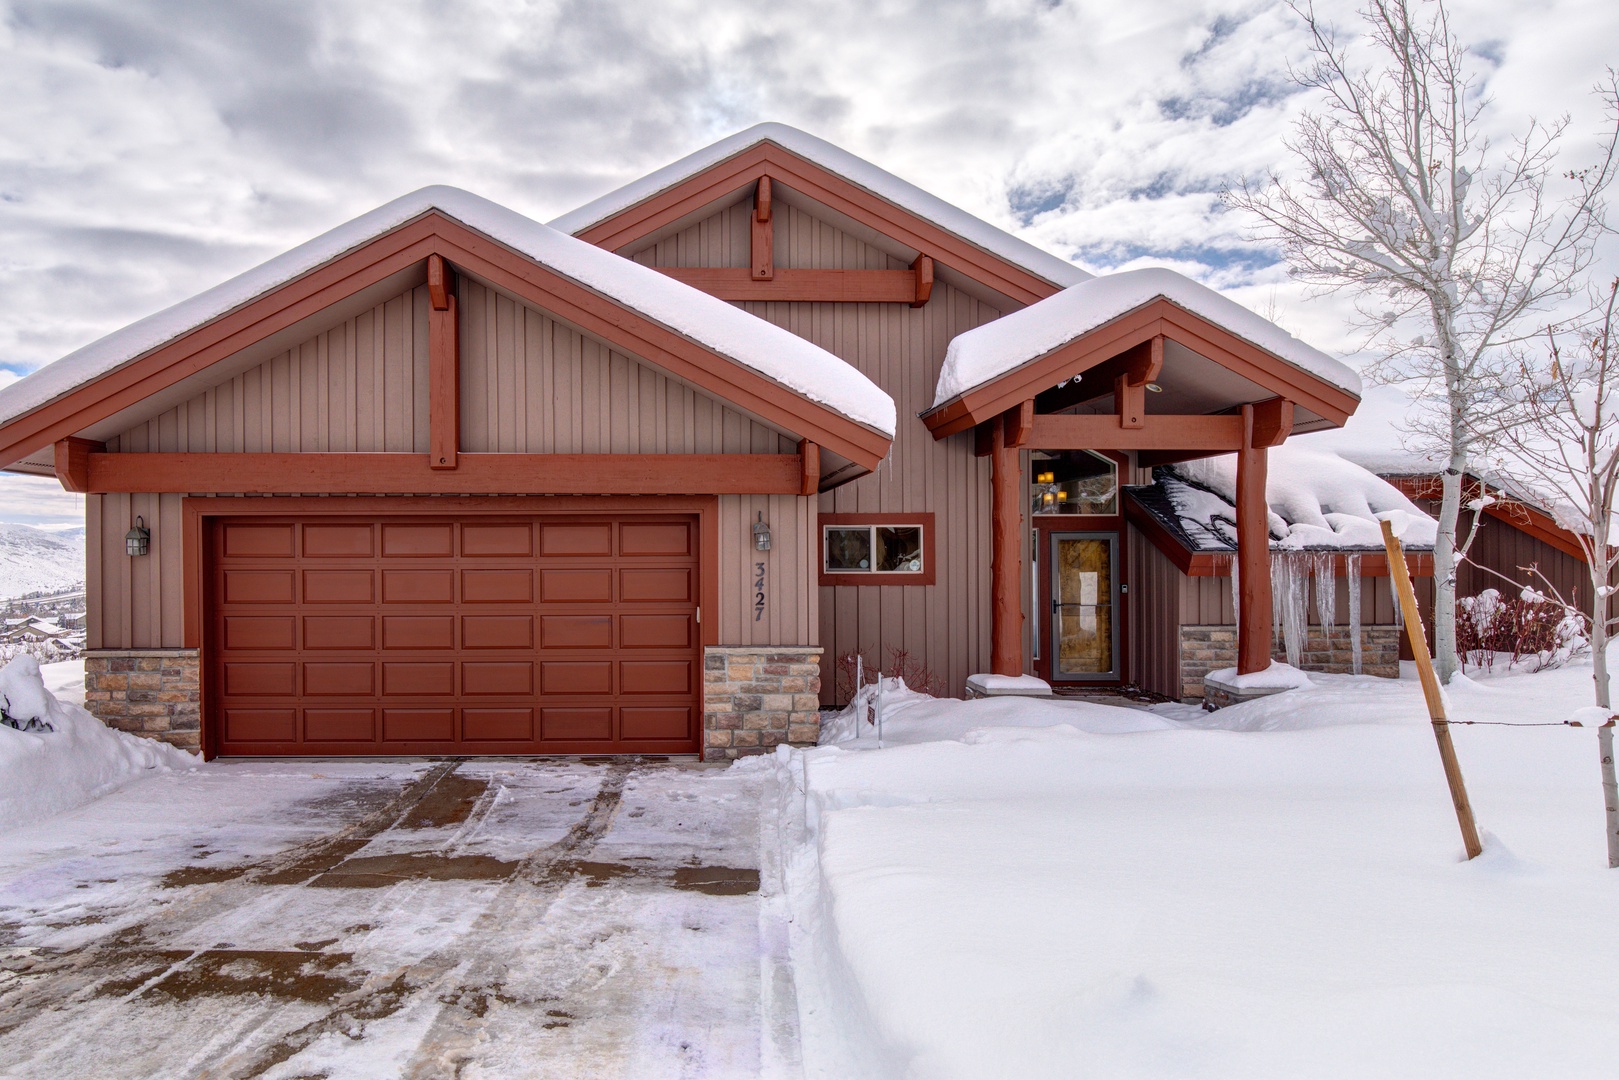 Park City Vacation Rentals, Cedar Ridge Townhouse - Parking is available for two vehicles in the garage. Overnight parking on the street or in the driveway is not permitted and subject to fine.